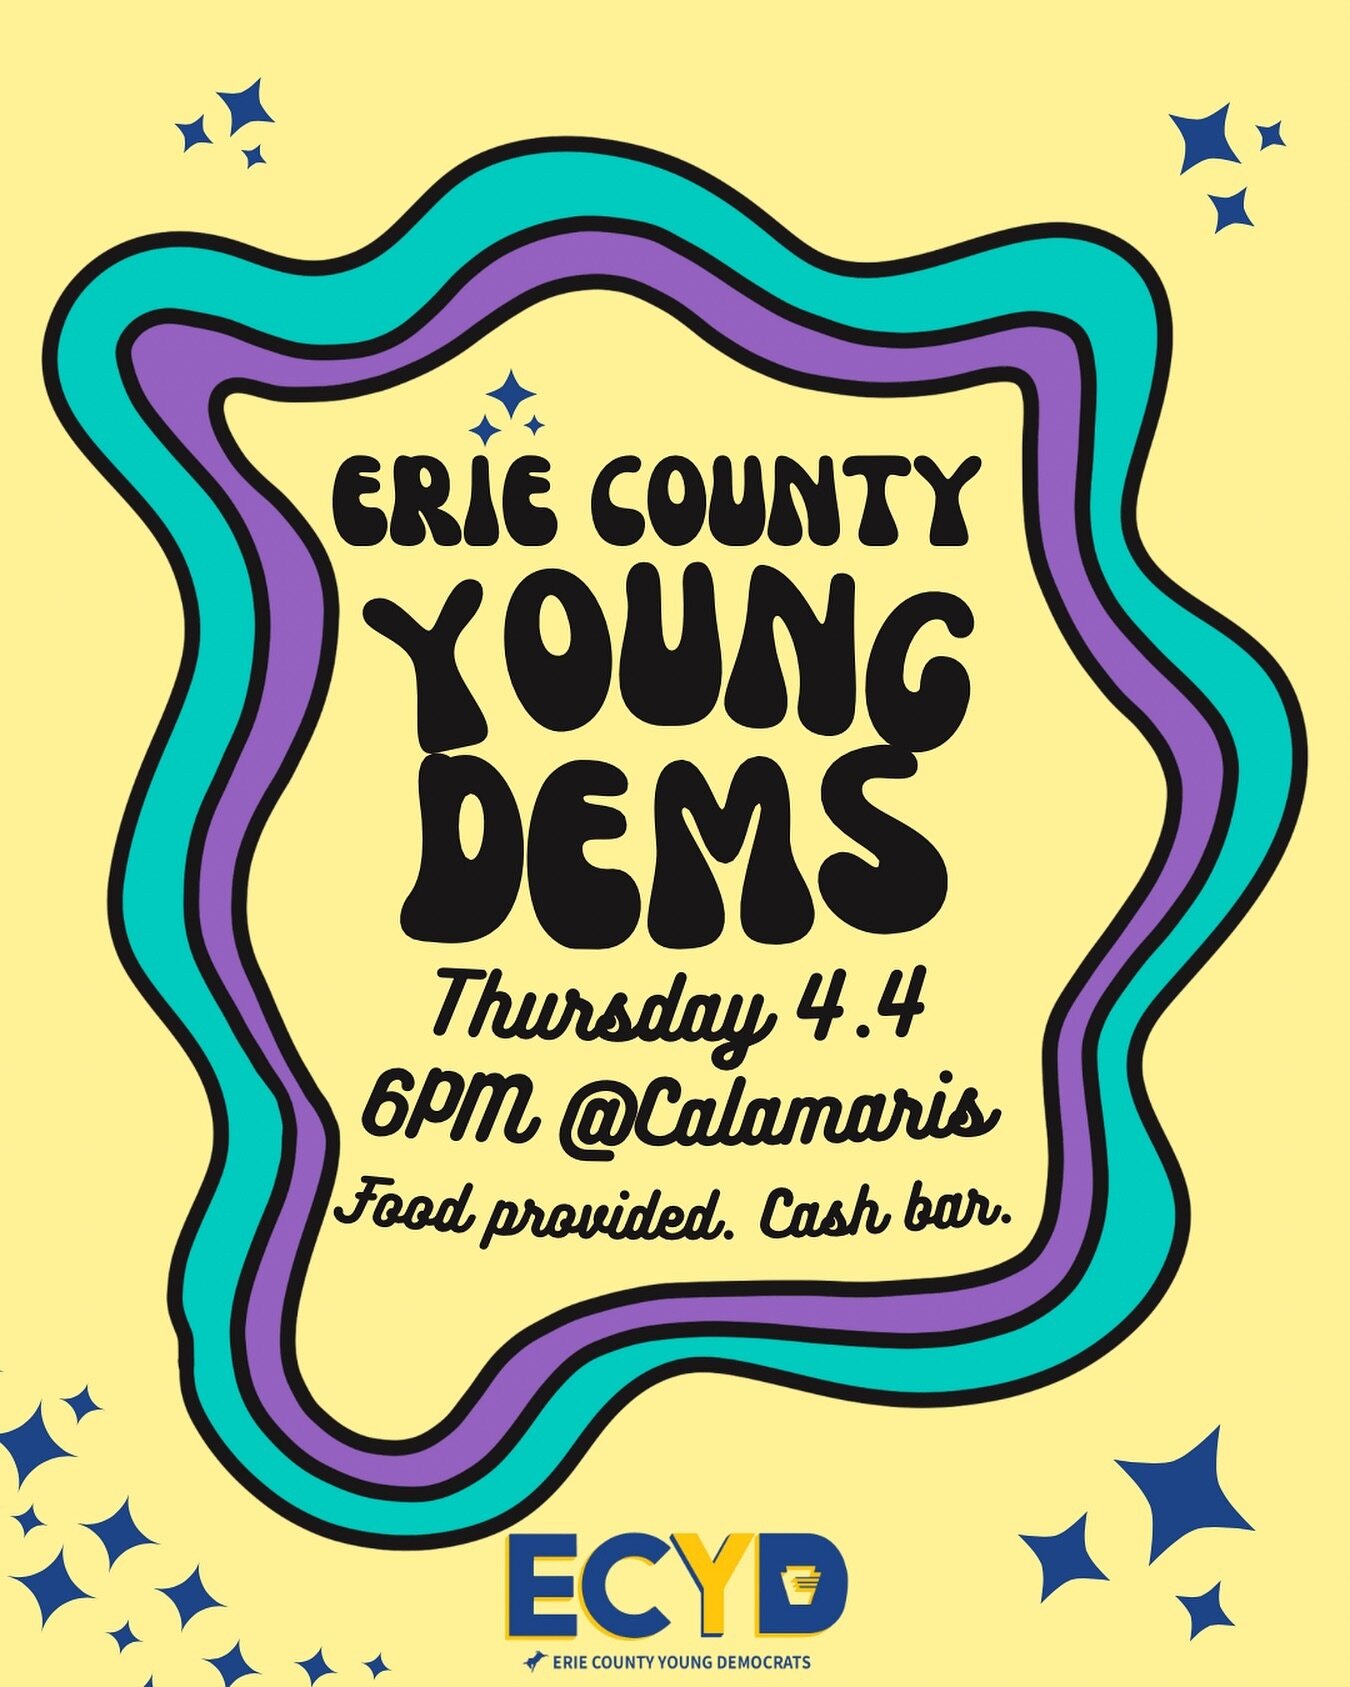 Mark your calendars and make sure you&rsquo;re there! 
What is a young Democrat? Anyone 40 and under. 
When will they meet? 4.4.24 at 6PM
Where? Calamari&rsquo;s 

SHARE 🎉

Be there and bring a friend! 

Food provided. Cash bar.